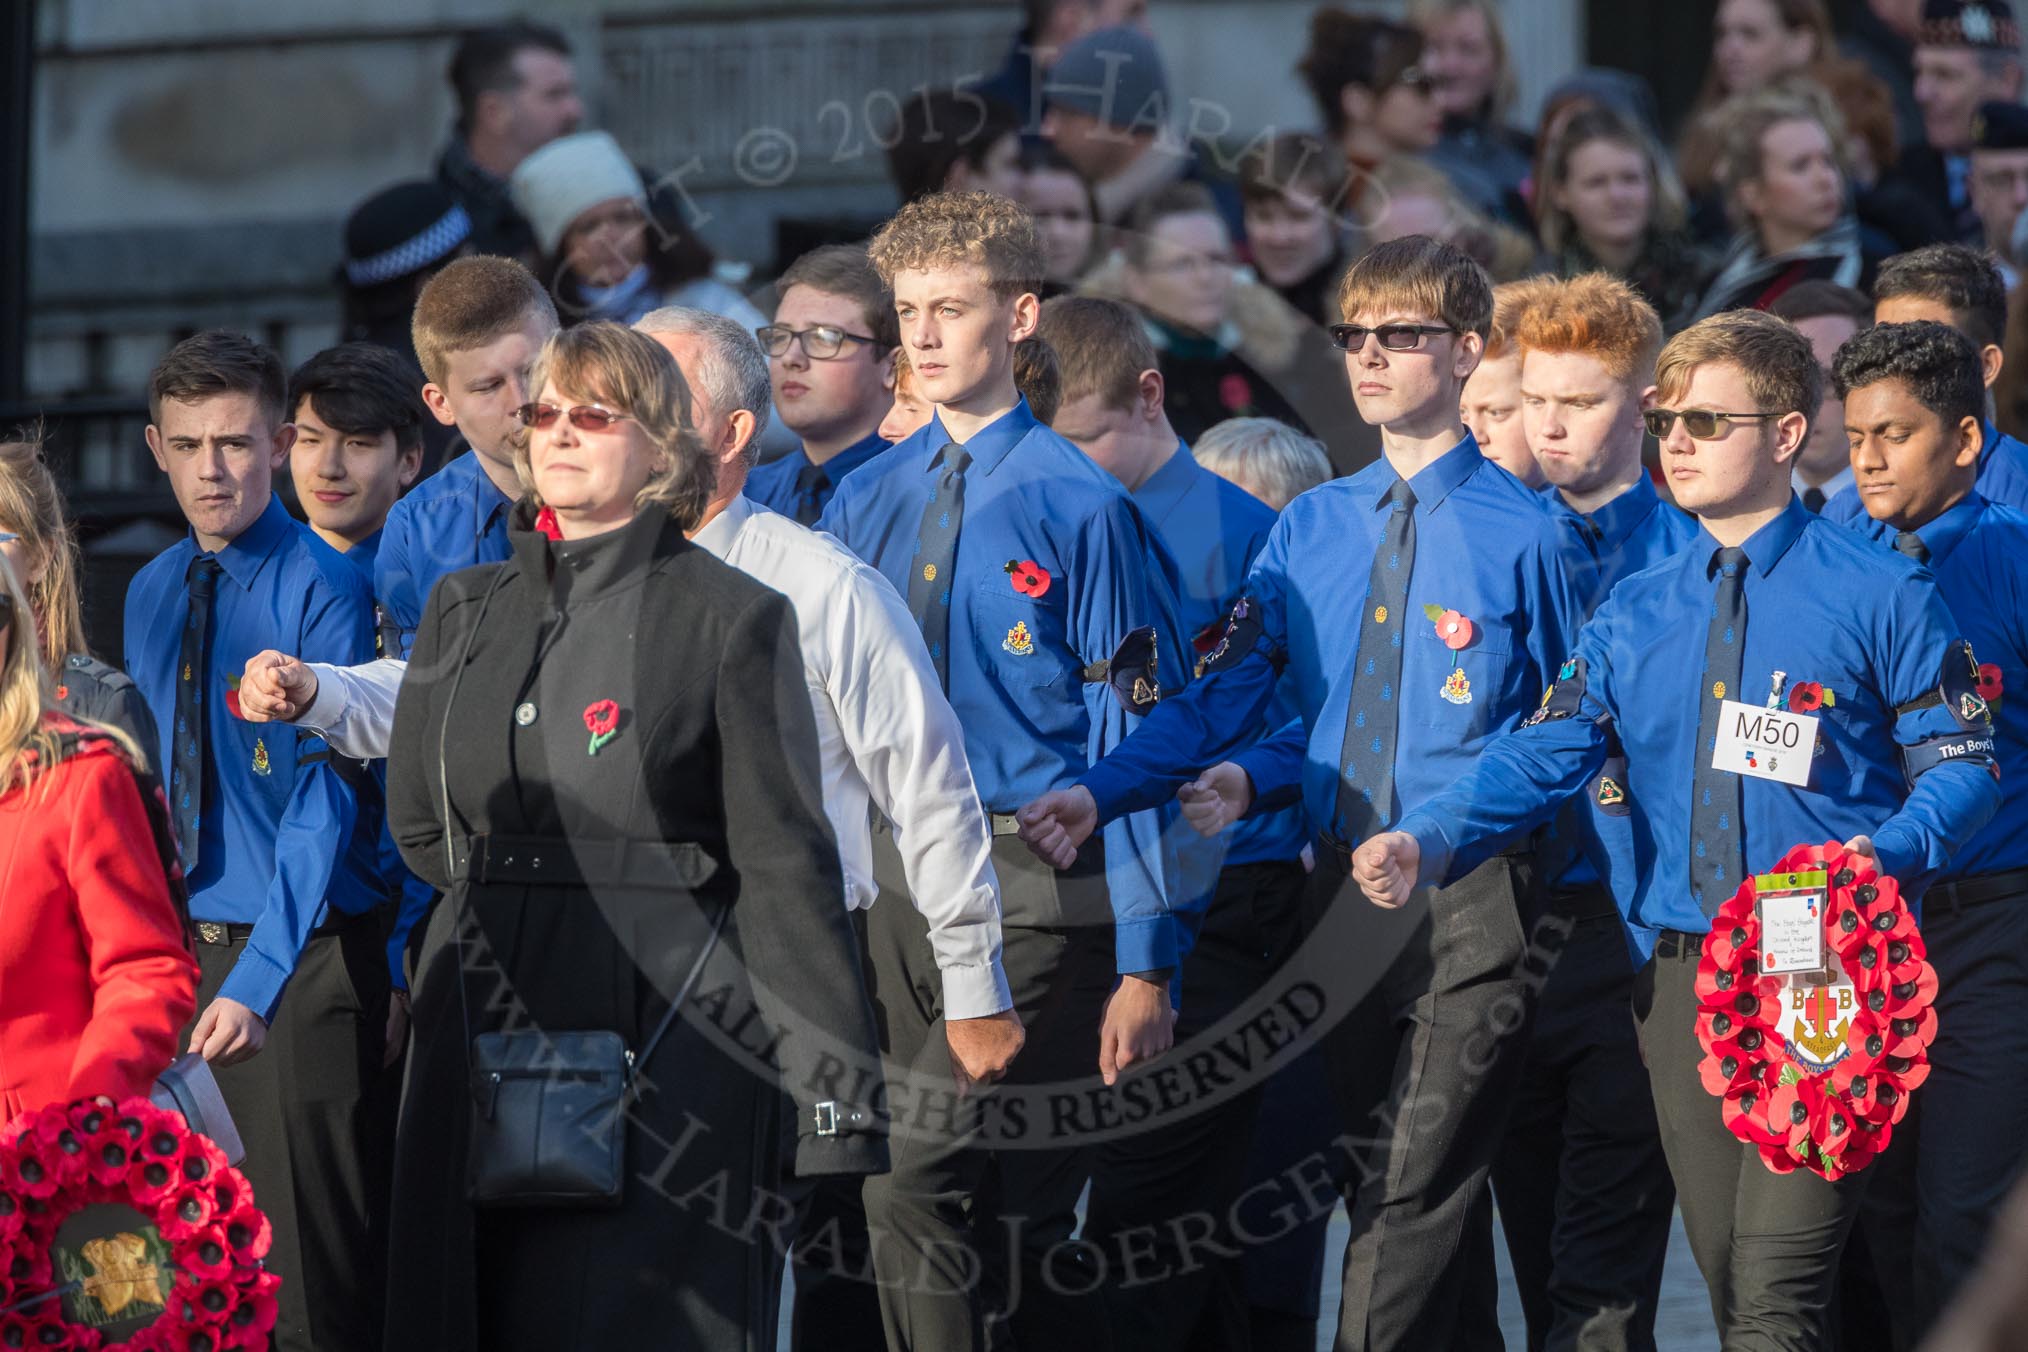 March Past, Remembrance Sunday at the Cenotaph 2016: M50 The Boys’ Brigade.
Cenotaph, Whitehall, London SW1,
London,
Greater London,
United Kingdom,
on 13 November 2016 at 13:20, image #3039